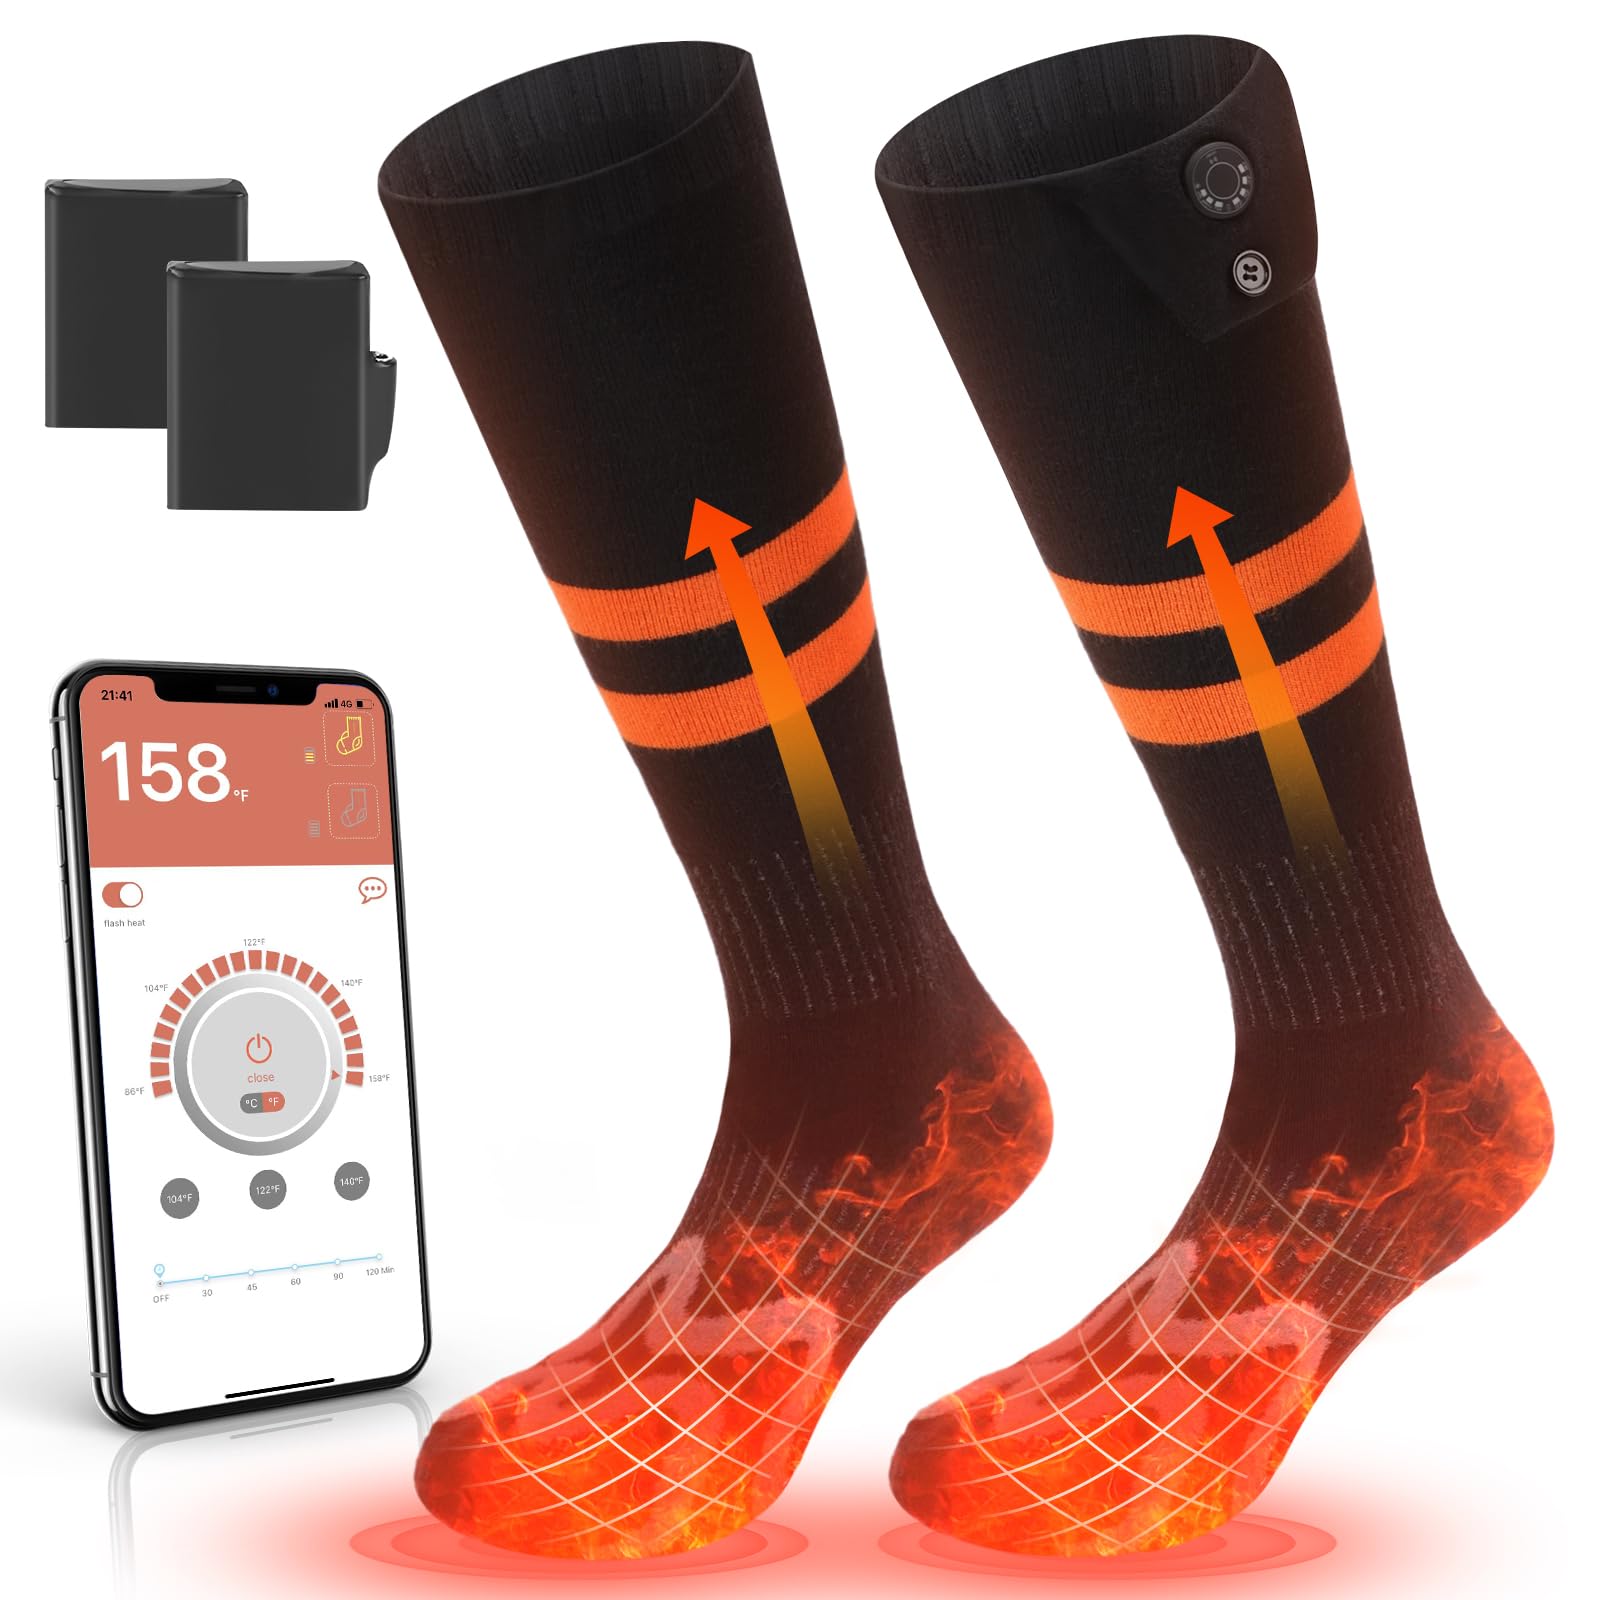 RELIRELIA Heated Socks, Rechargeable Heated Socks for Men Women, 7.4V 3000mAh Battery Powered Electric Socks with APP Control 3 Heating Le